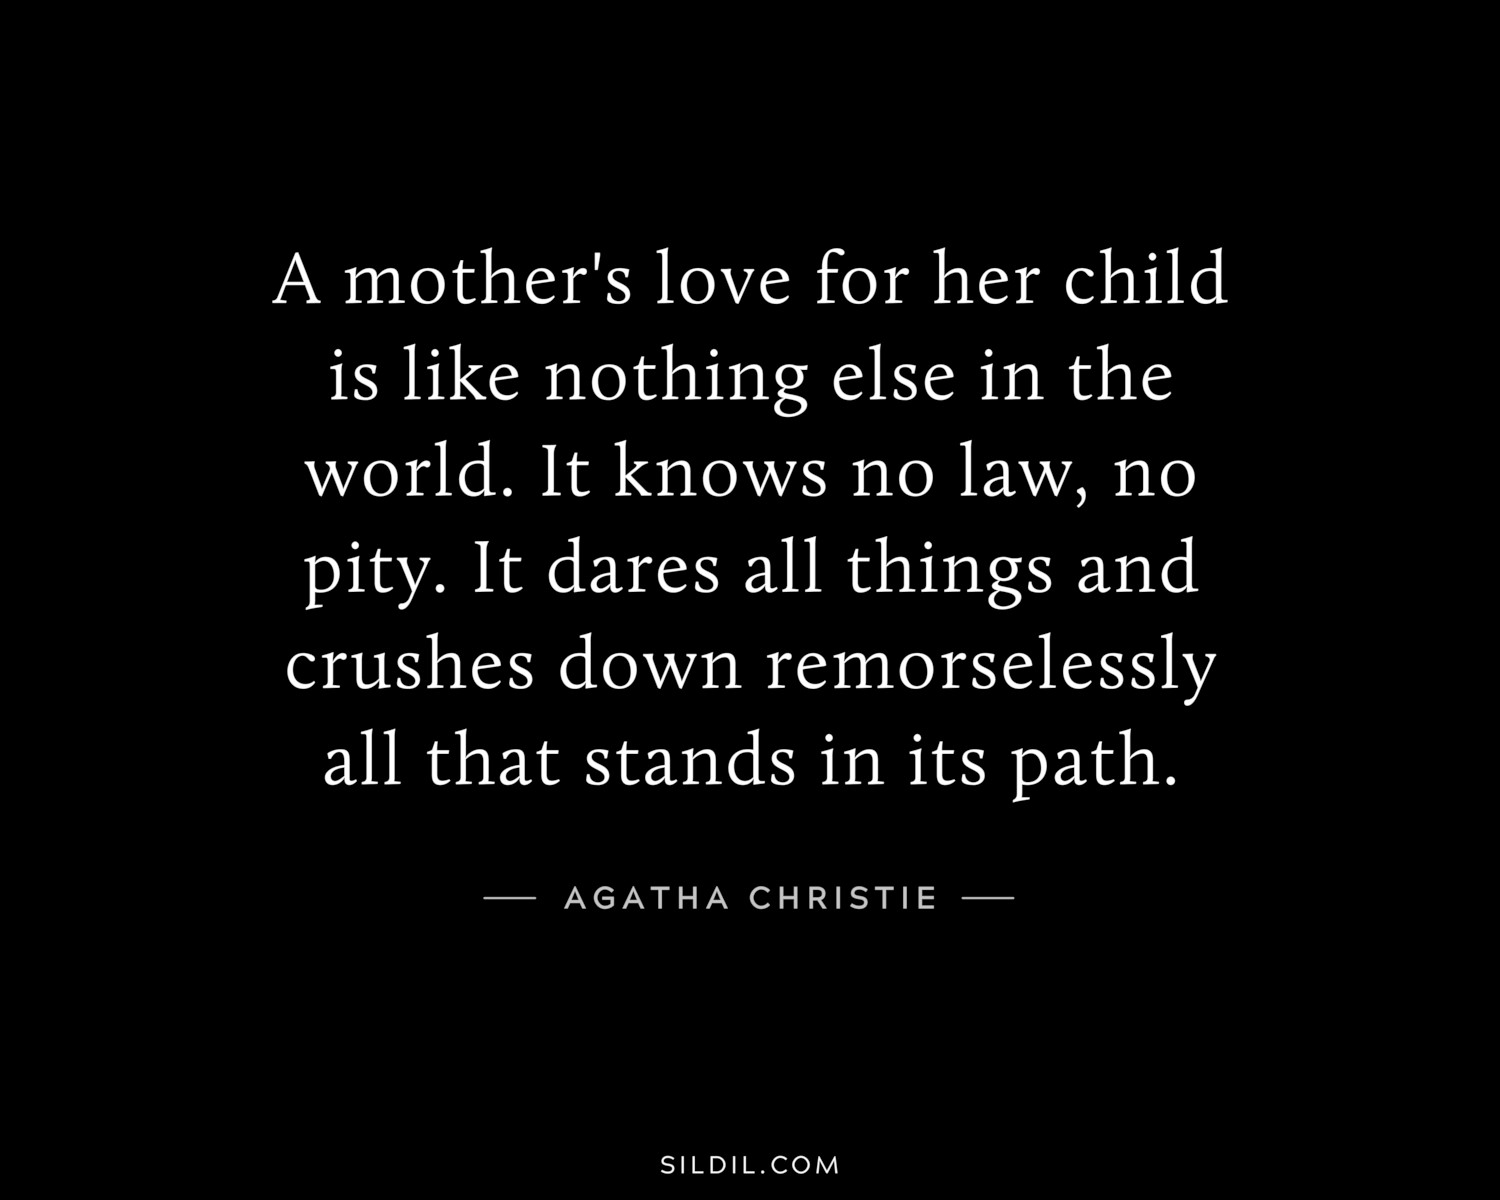 A mother's love for her child is like nothing else in the world. It knows no law, no pity. It dares all things and crushes down remorselessly all that stands in its path.